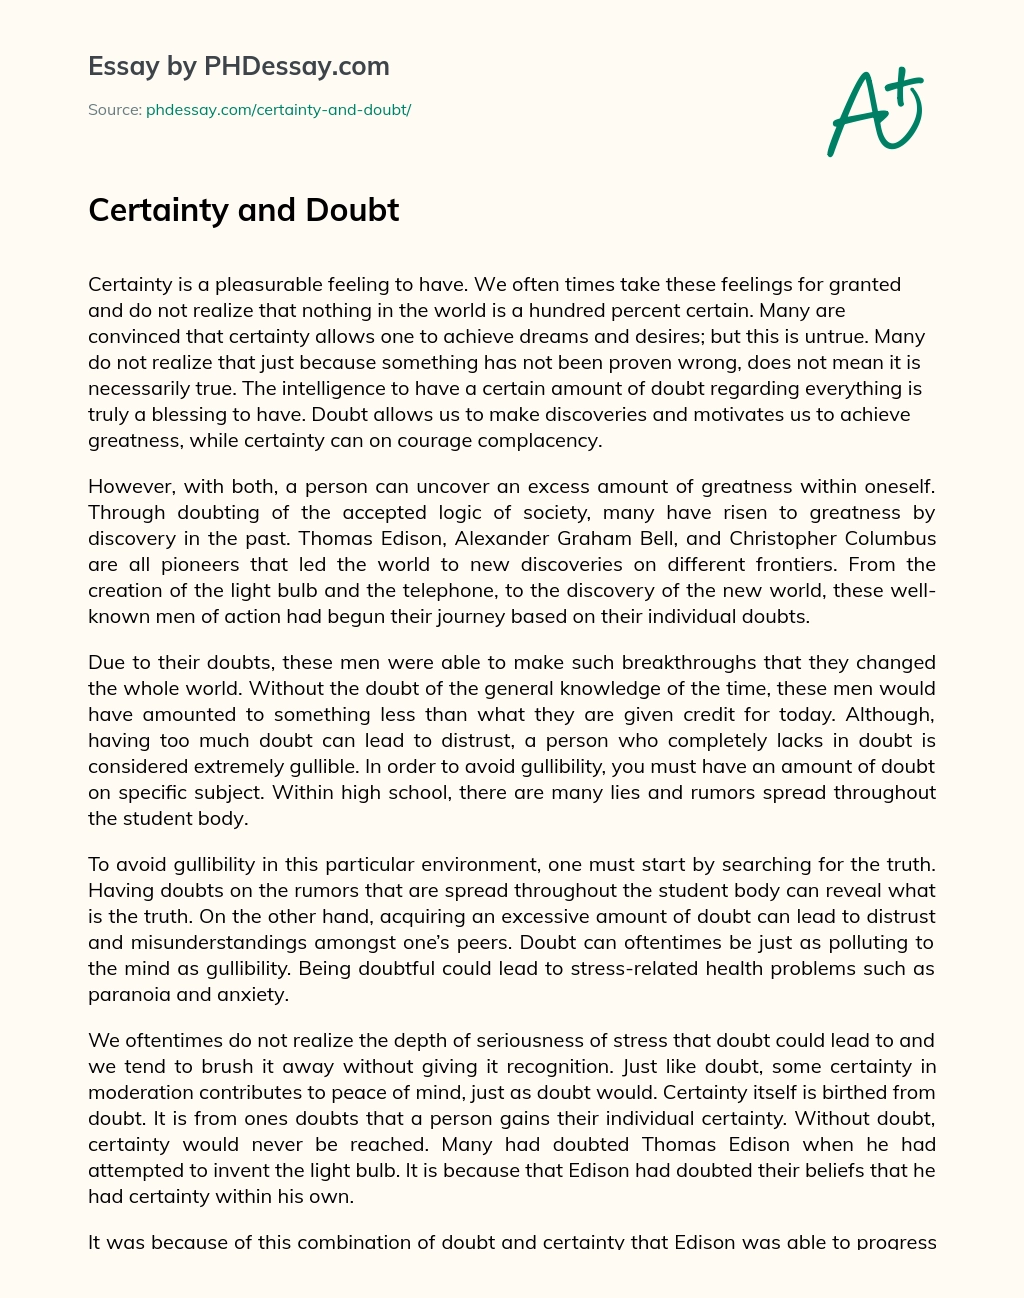 Certainty and Doubt essay